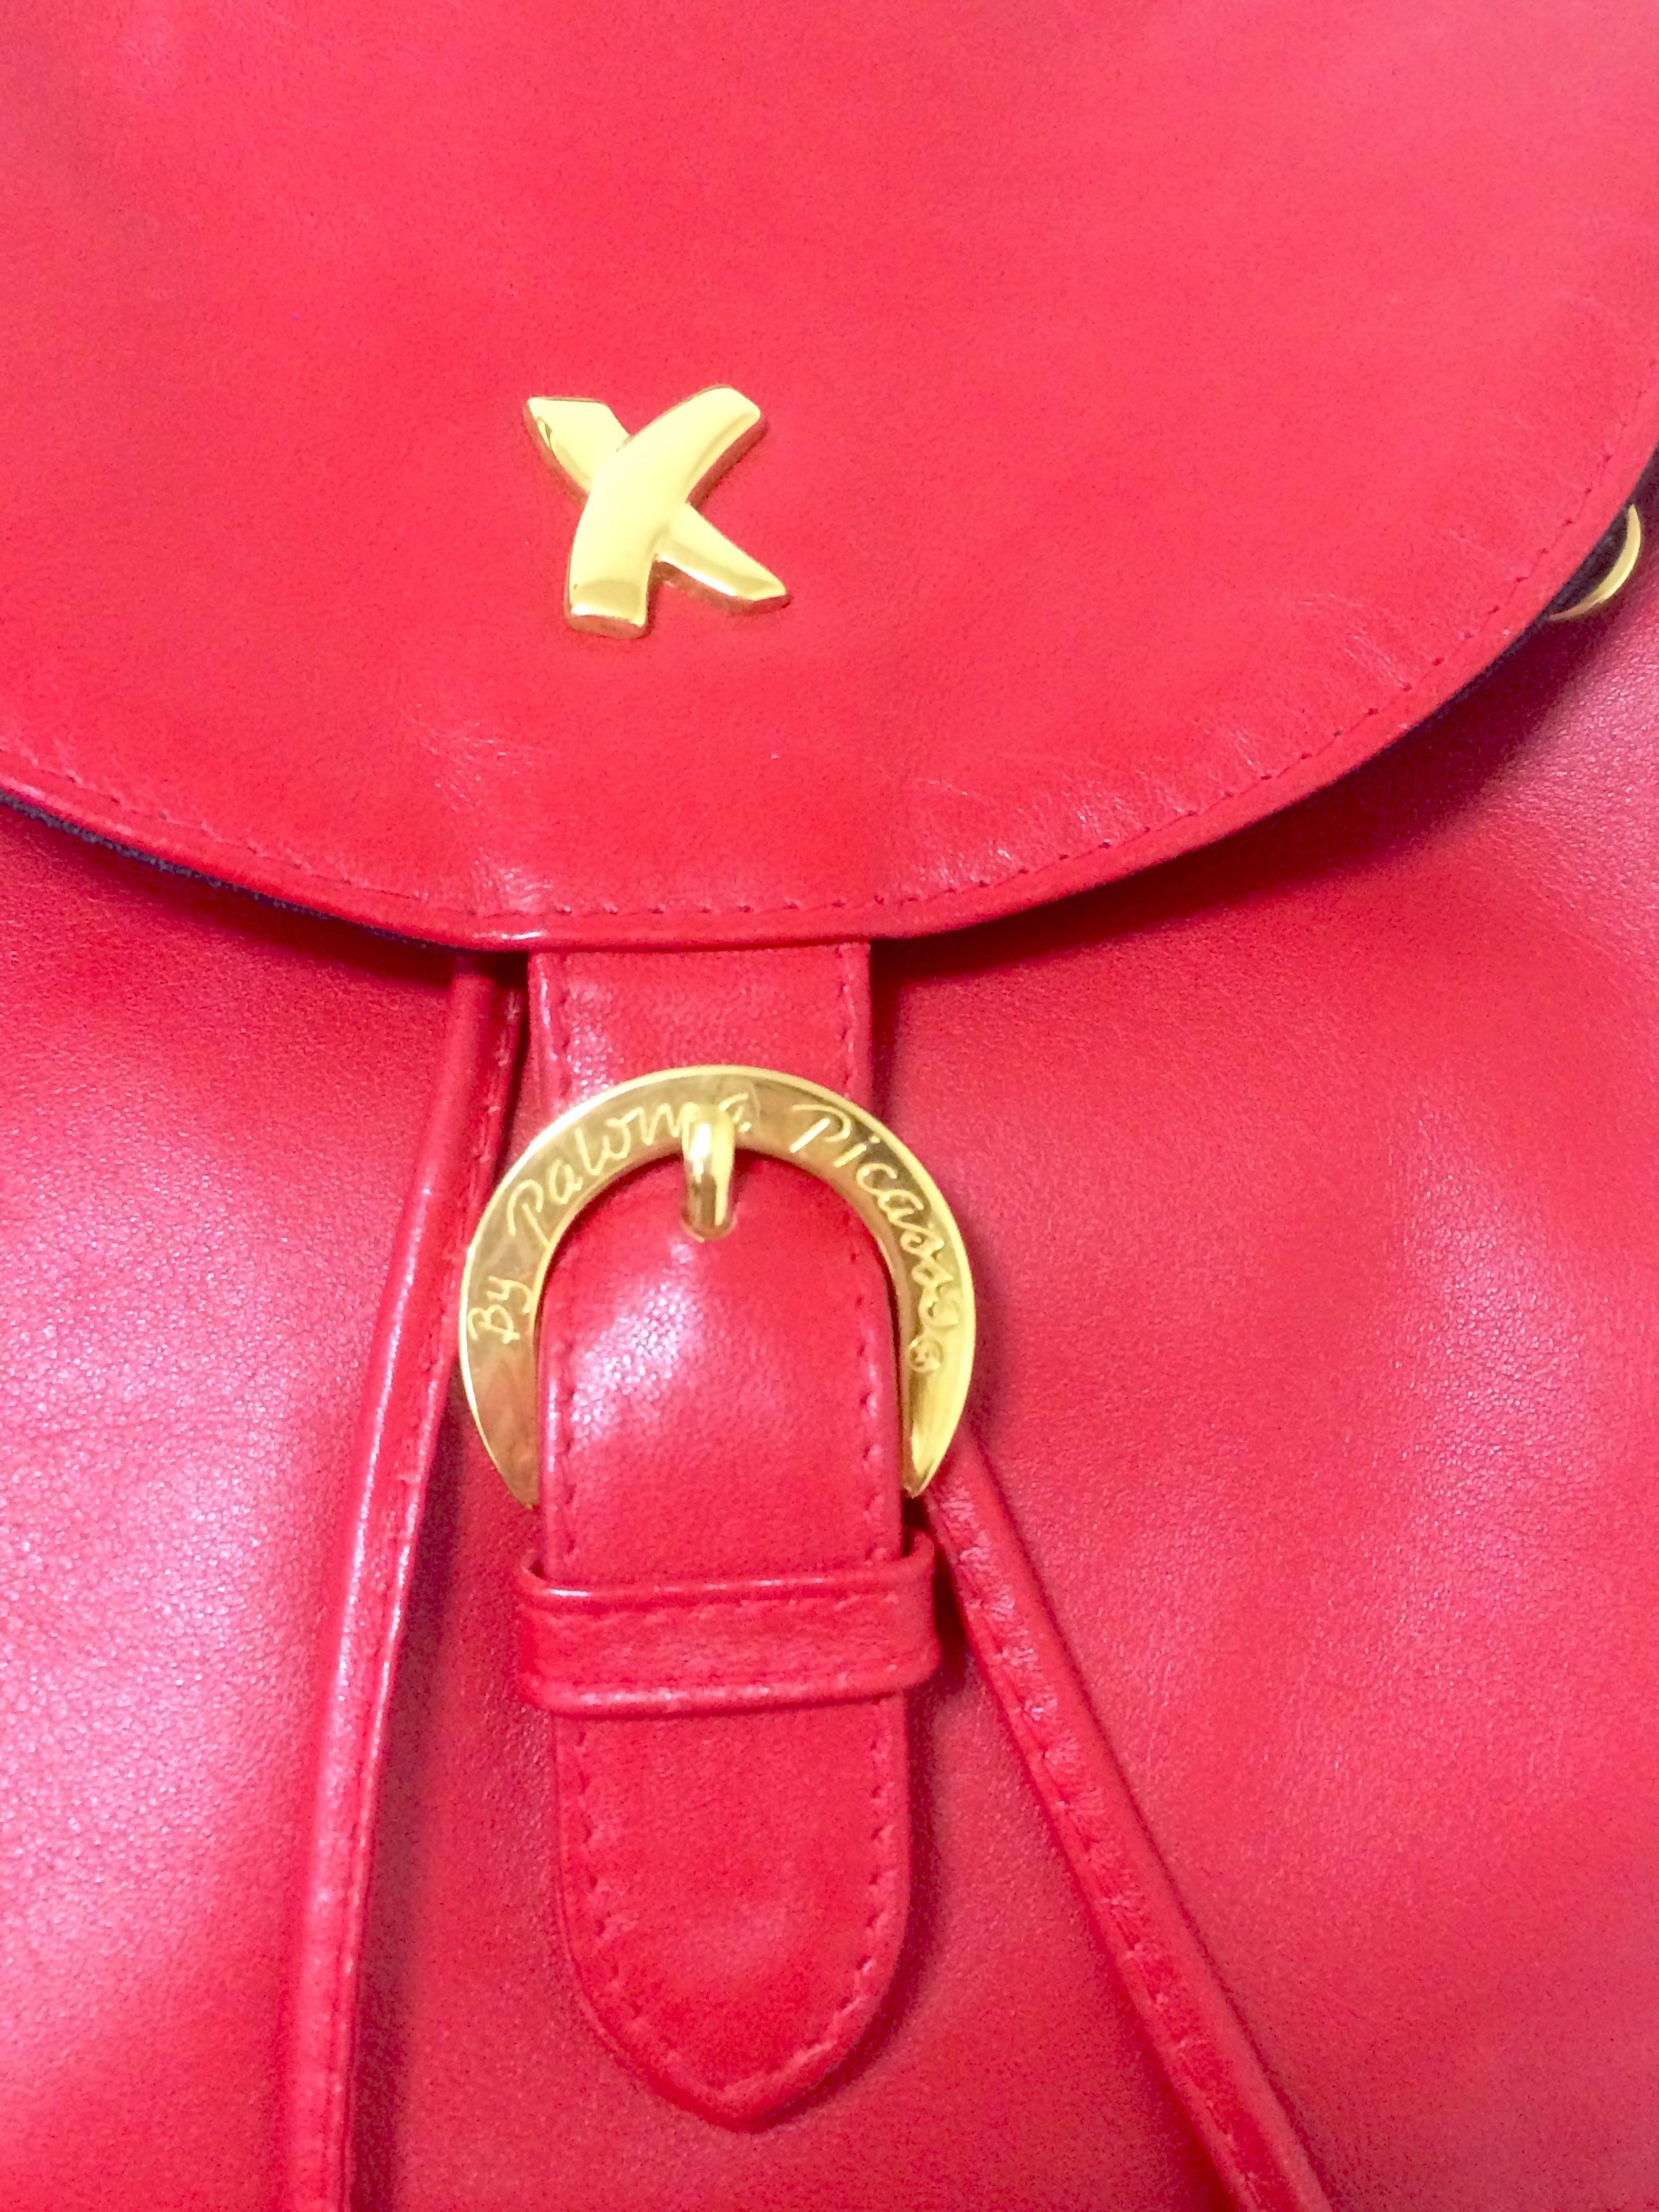 Red Vintage Paloma Picasso red leather backpack with golden logo motifs. Classic bag